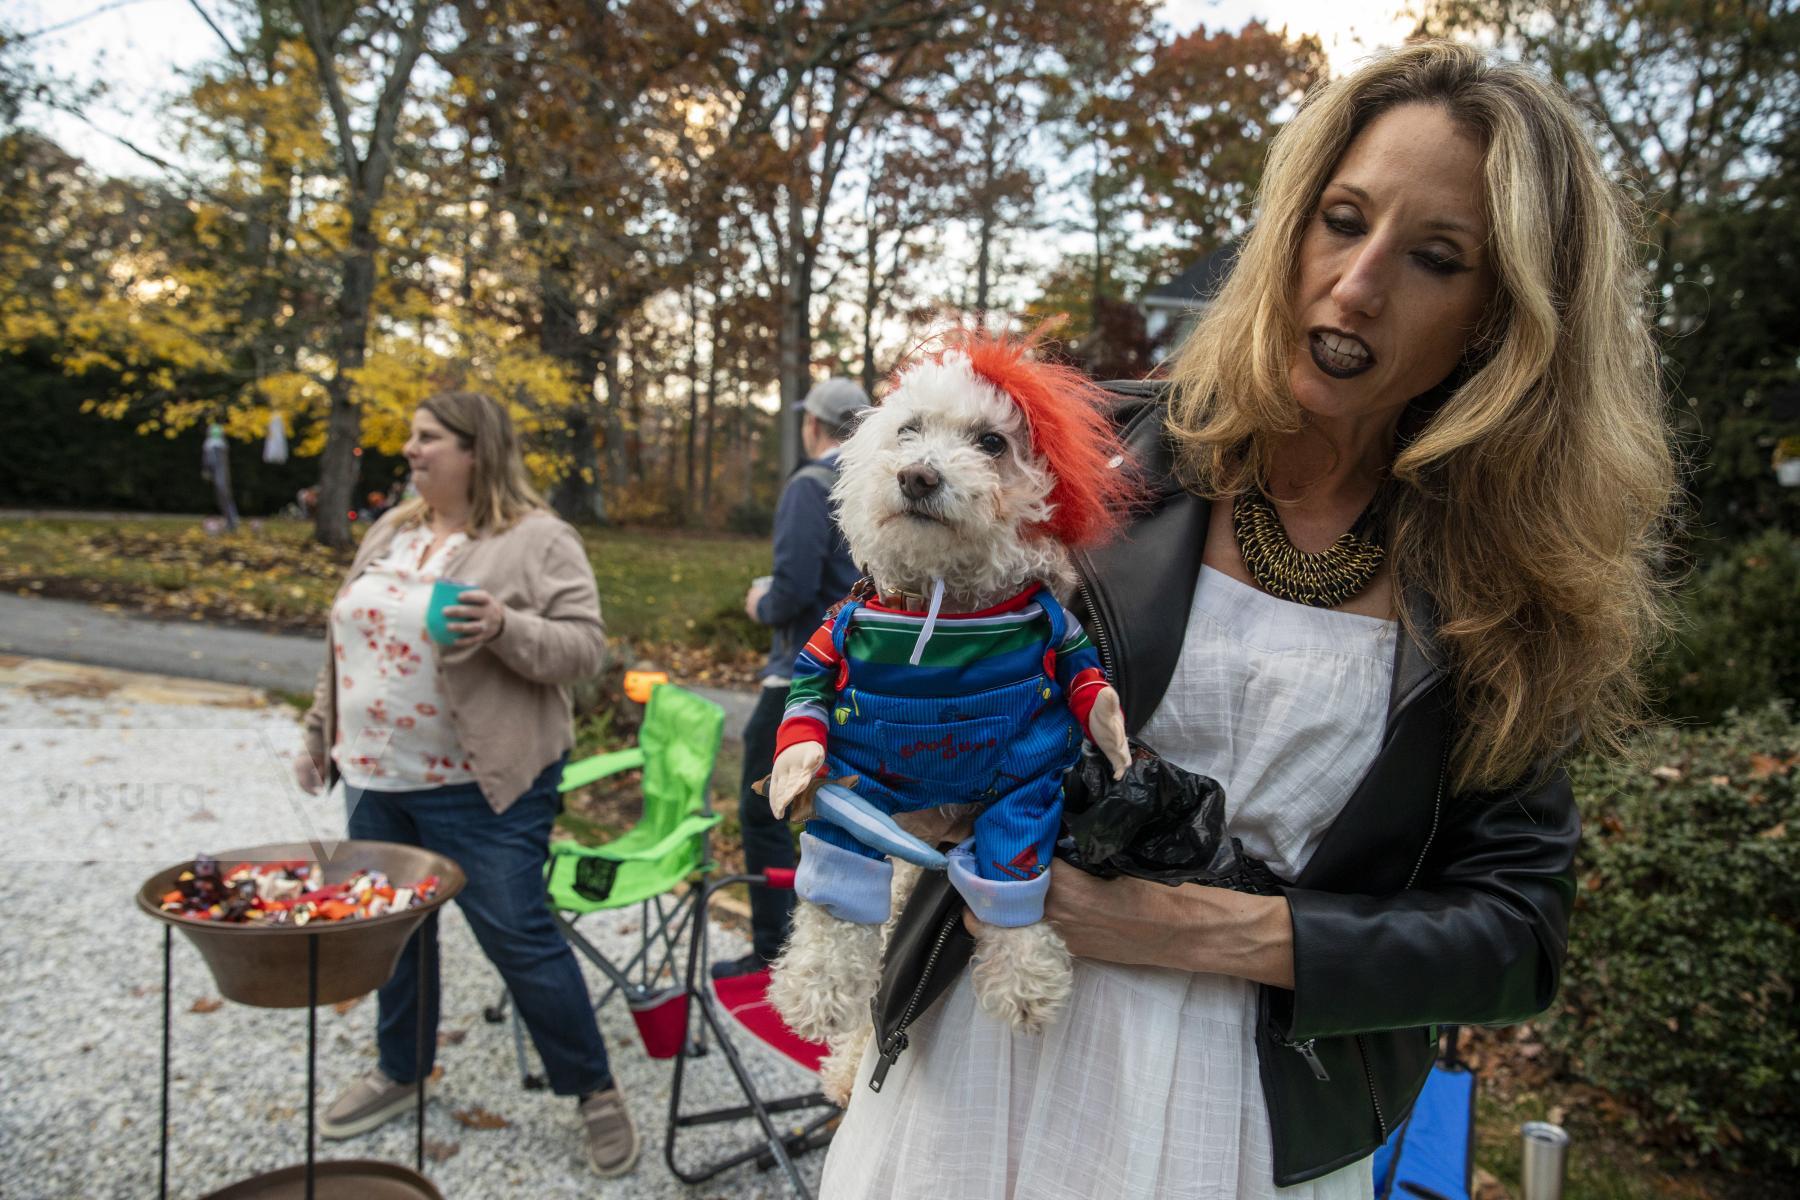 Purchase Chucky Dog for Halloween by Katie Linsky Shaw